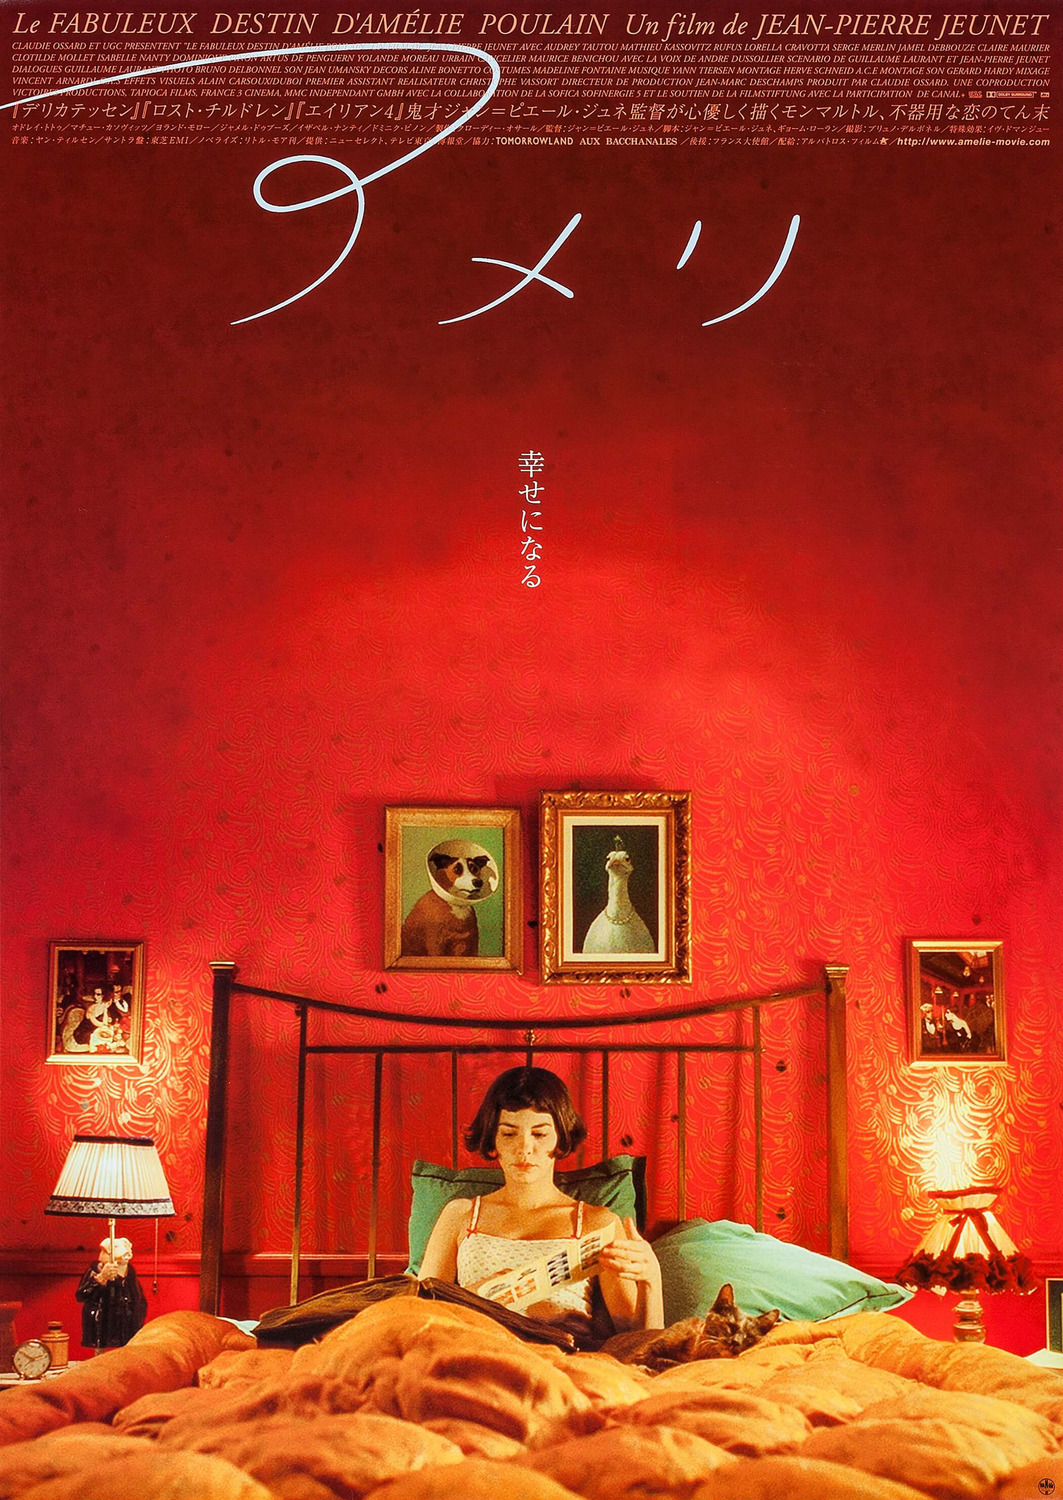 Extra Large Movie Poster Image for Amelie (#4 of 4)